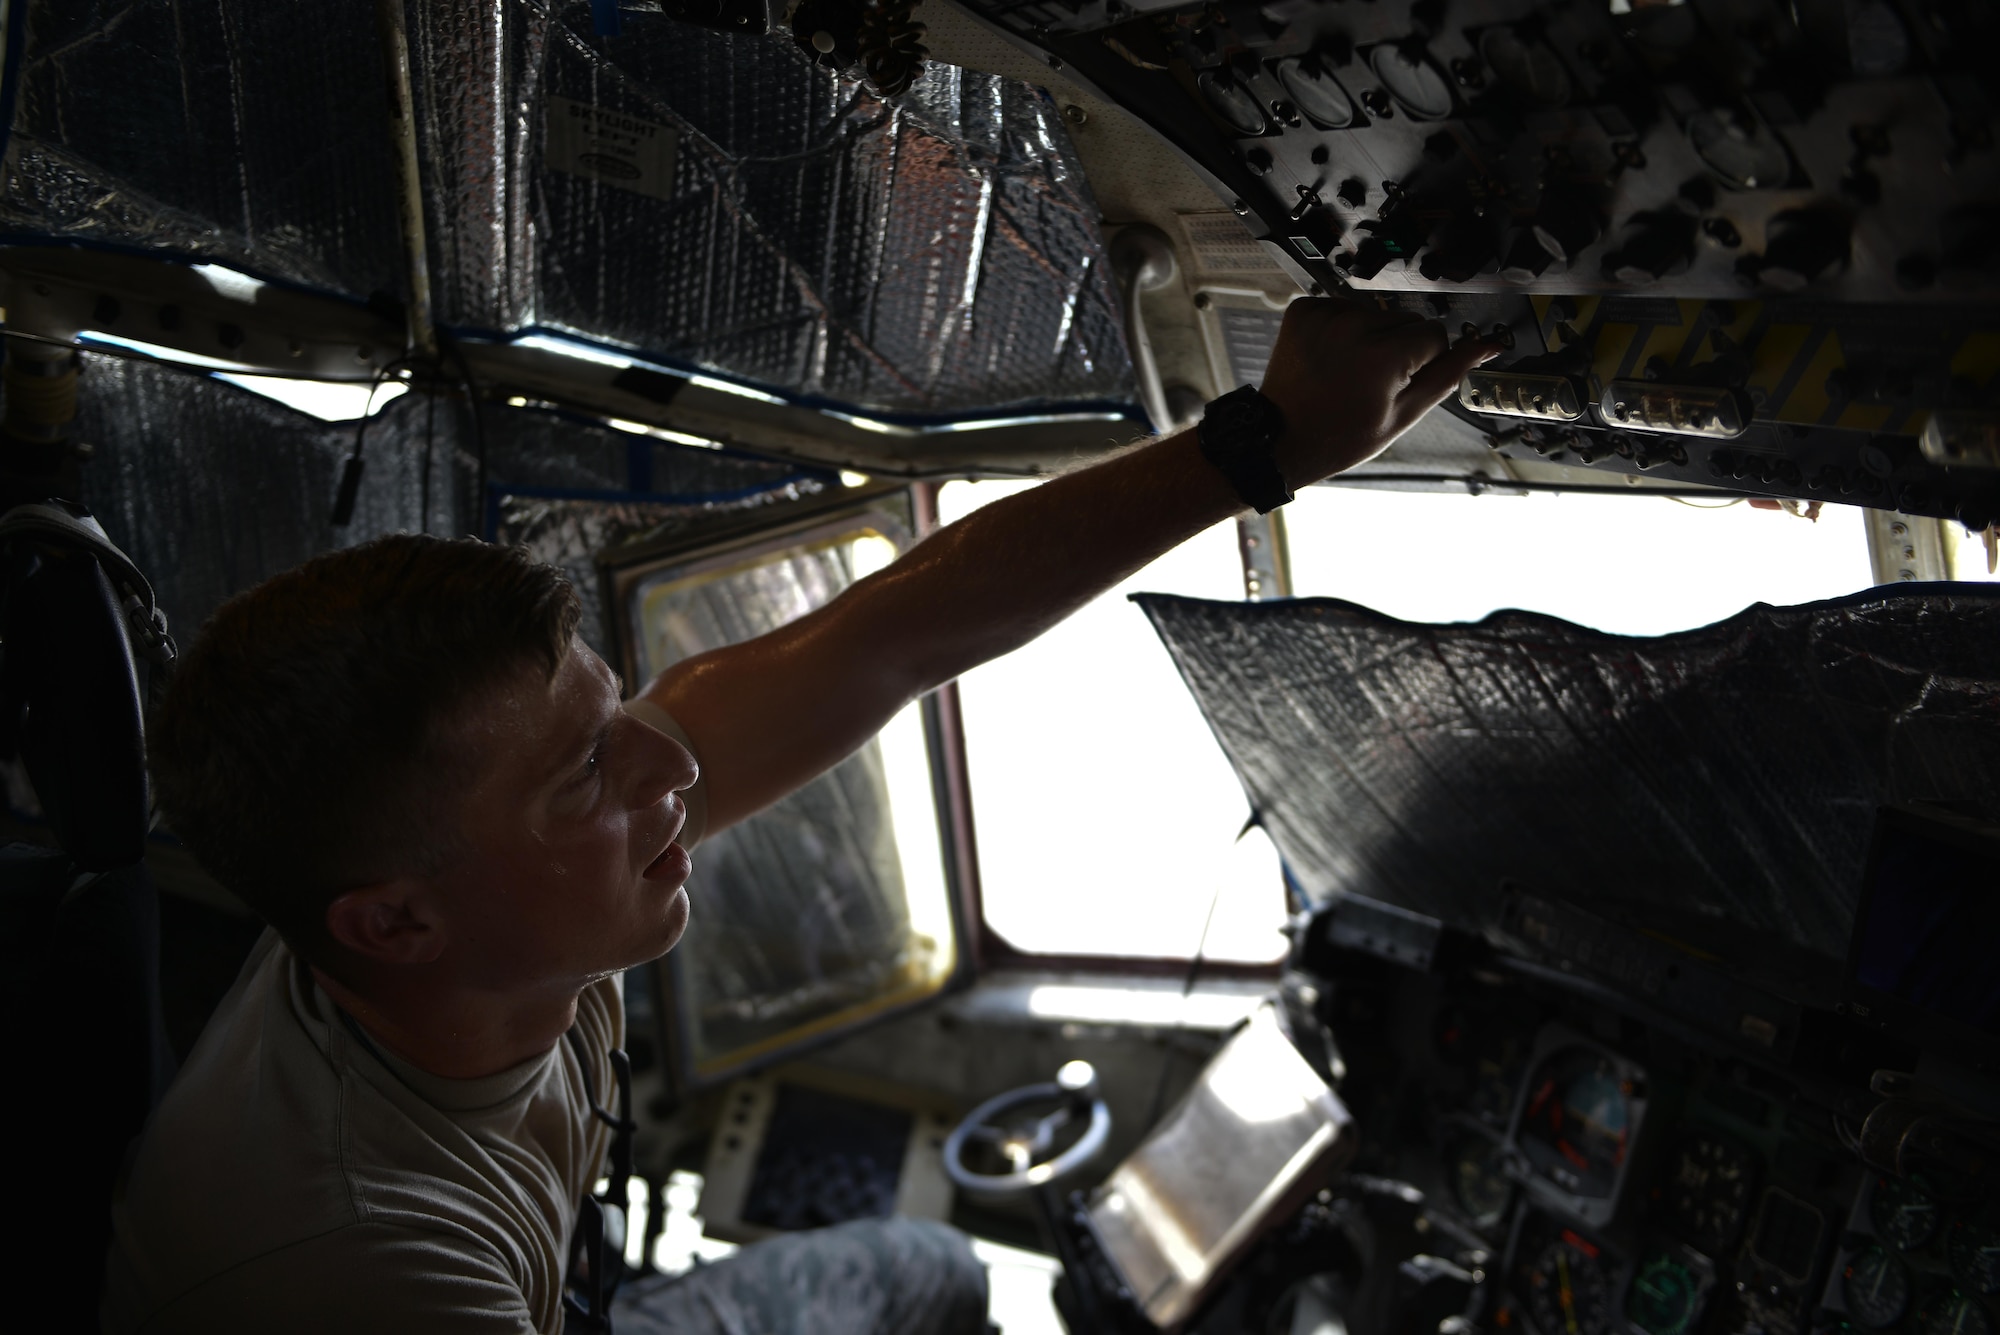 Senior Airman Ryan Patrick, 379th Expeditionary Aircraft Maintenance Squadron, 746th Expeditionary Aircraft Maintenance Unit, tests the lamination of each gauge inside the cockpit of a C-130 Hercules during a routine maintenance inspection September 9, 2015 at Al Udeid Air Base, Qatar. The 746th AMU airmen are responsible for ensuring aircraft are maintained to exact standards to support Operation Inherent Resolve. Patrick is a deployed member of the 911th Airlift Wing, Pittsburgh International Airport Air Reserve Station, Pa. (U.S. Air Force photo/Staff Sgt. Alexandre Montes)  